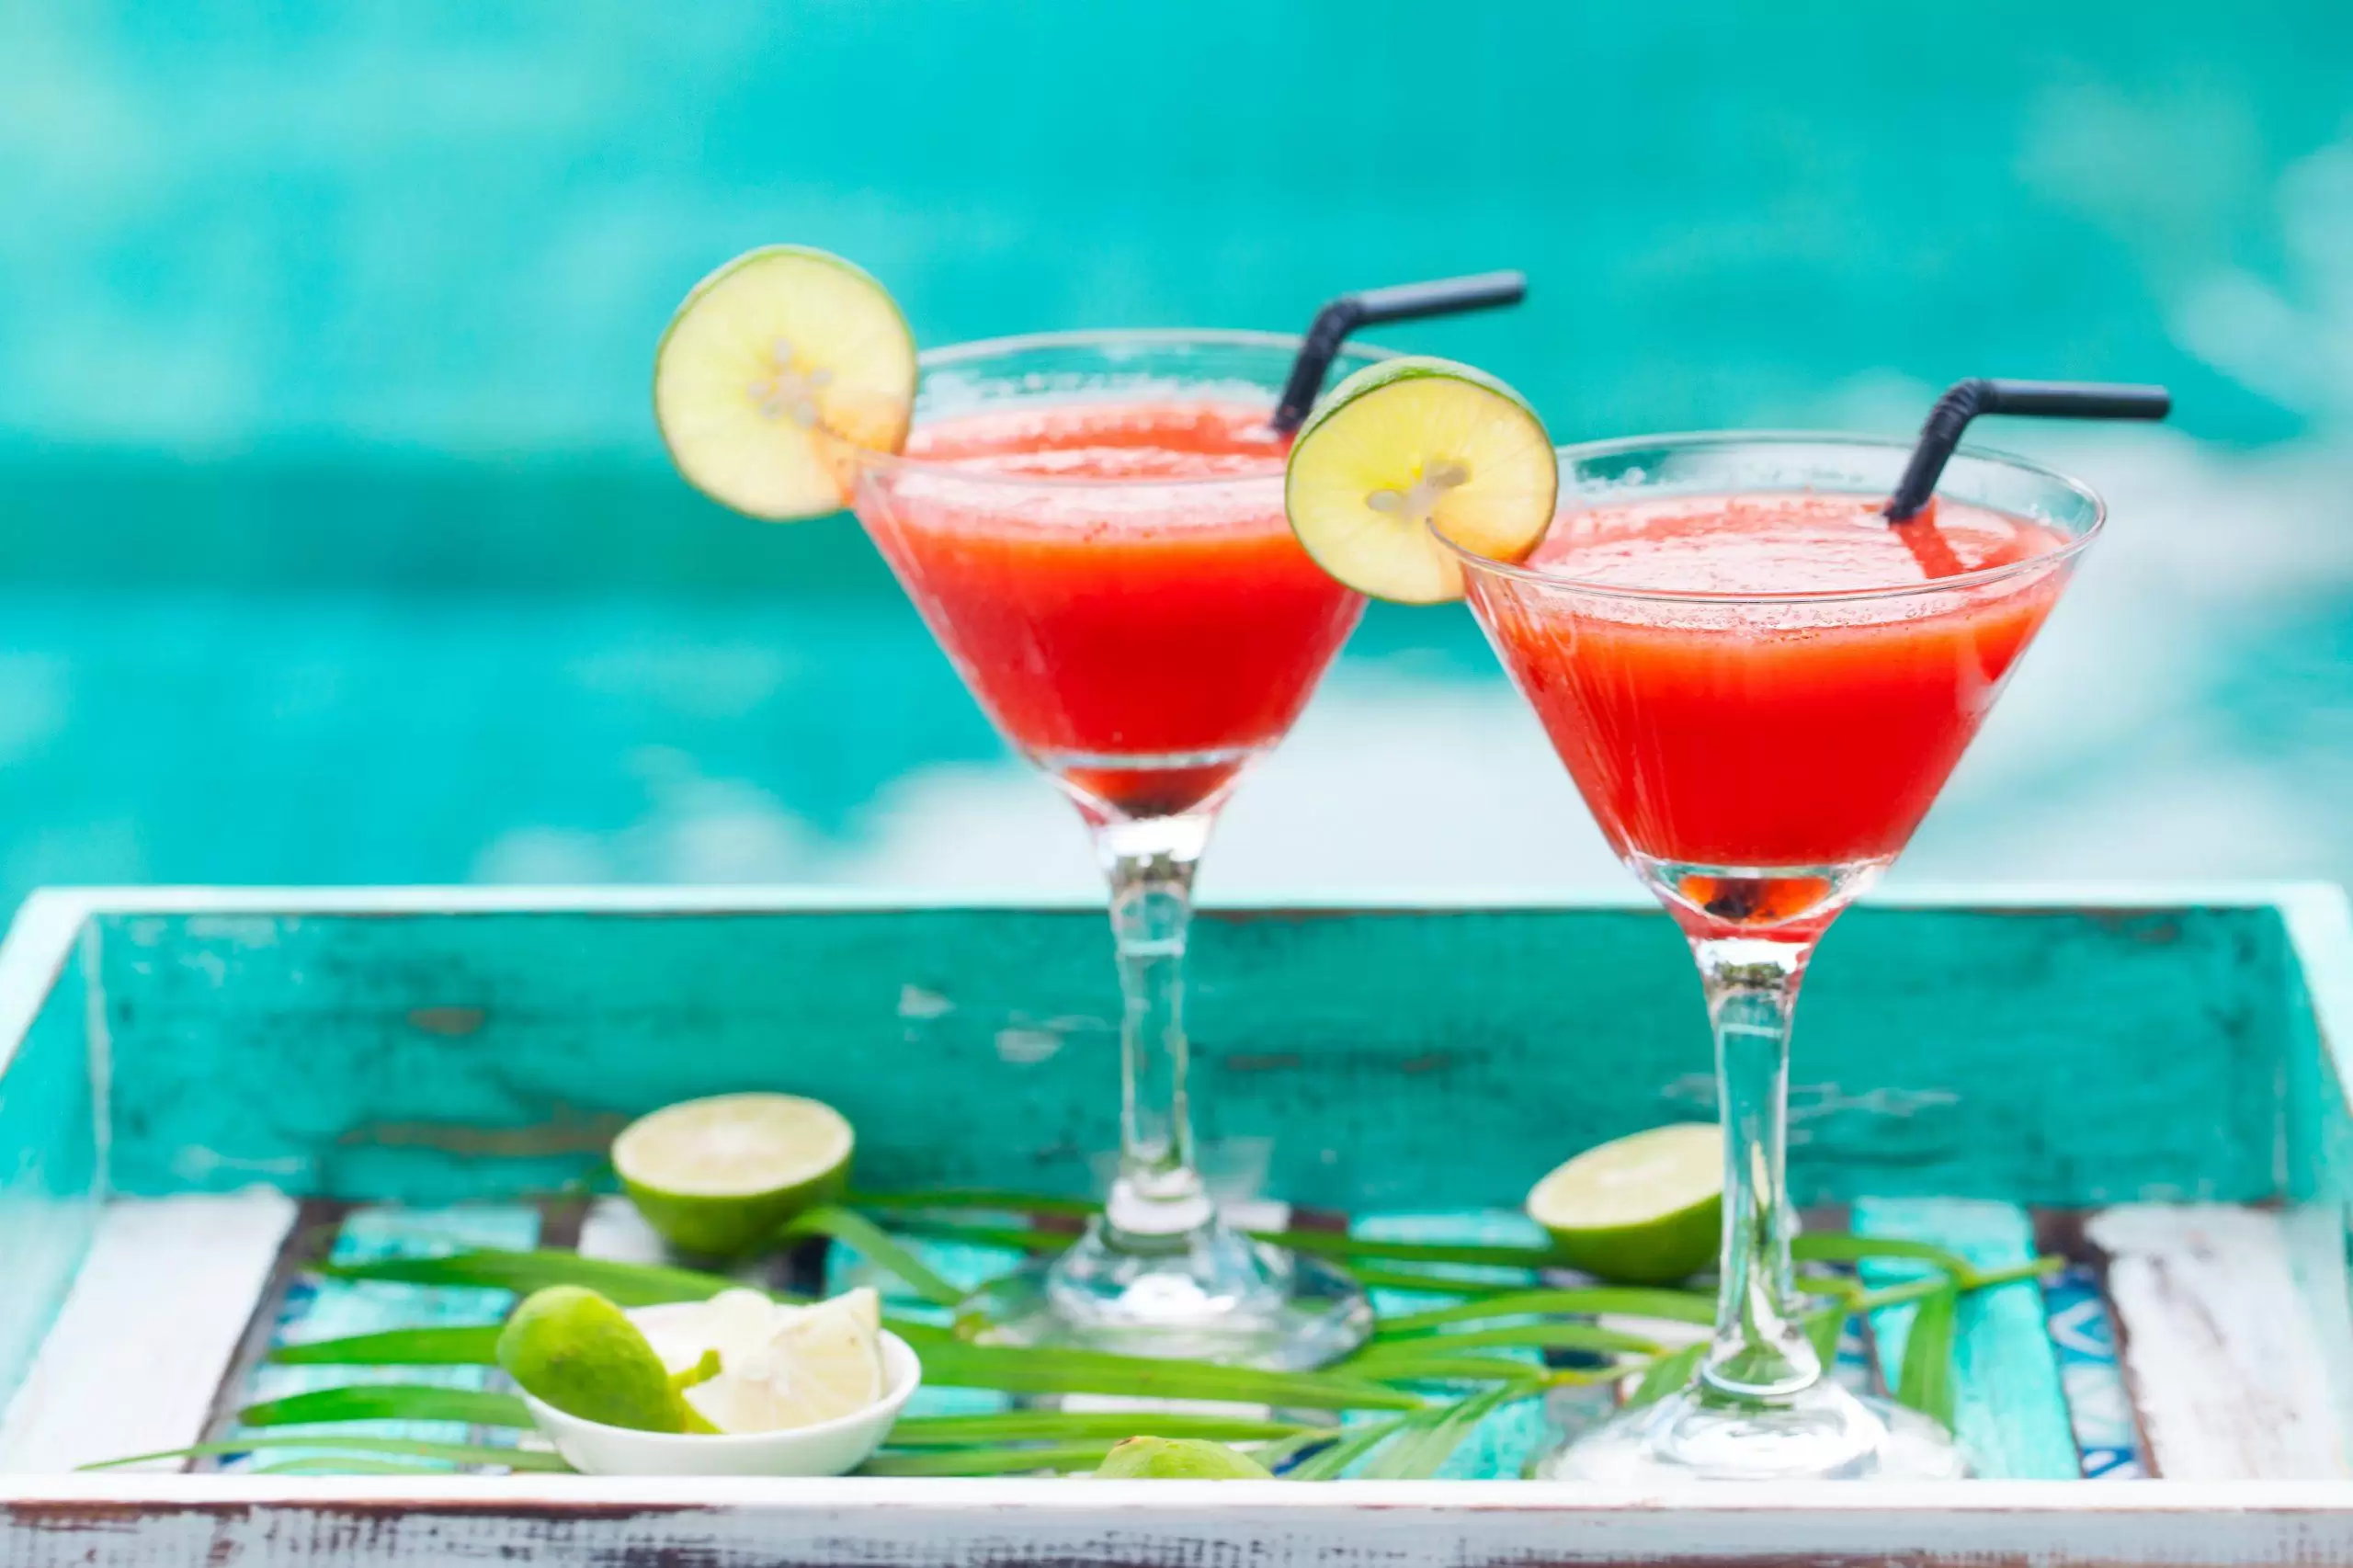 strawberry-margarita-cocktail-on-colorful-wooden-b-9XEYHU7-min